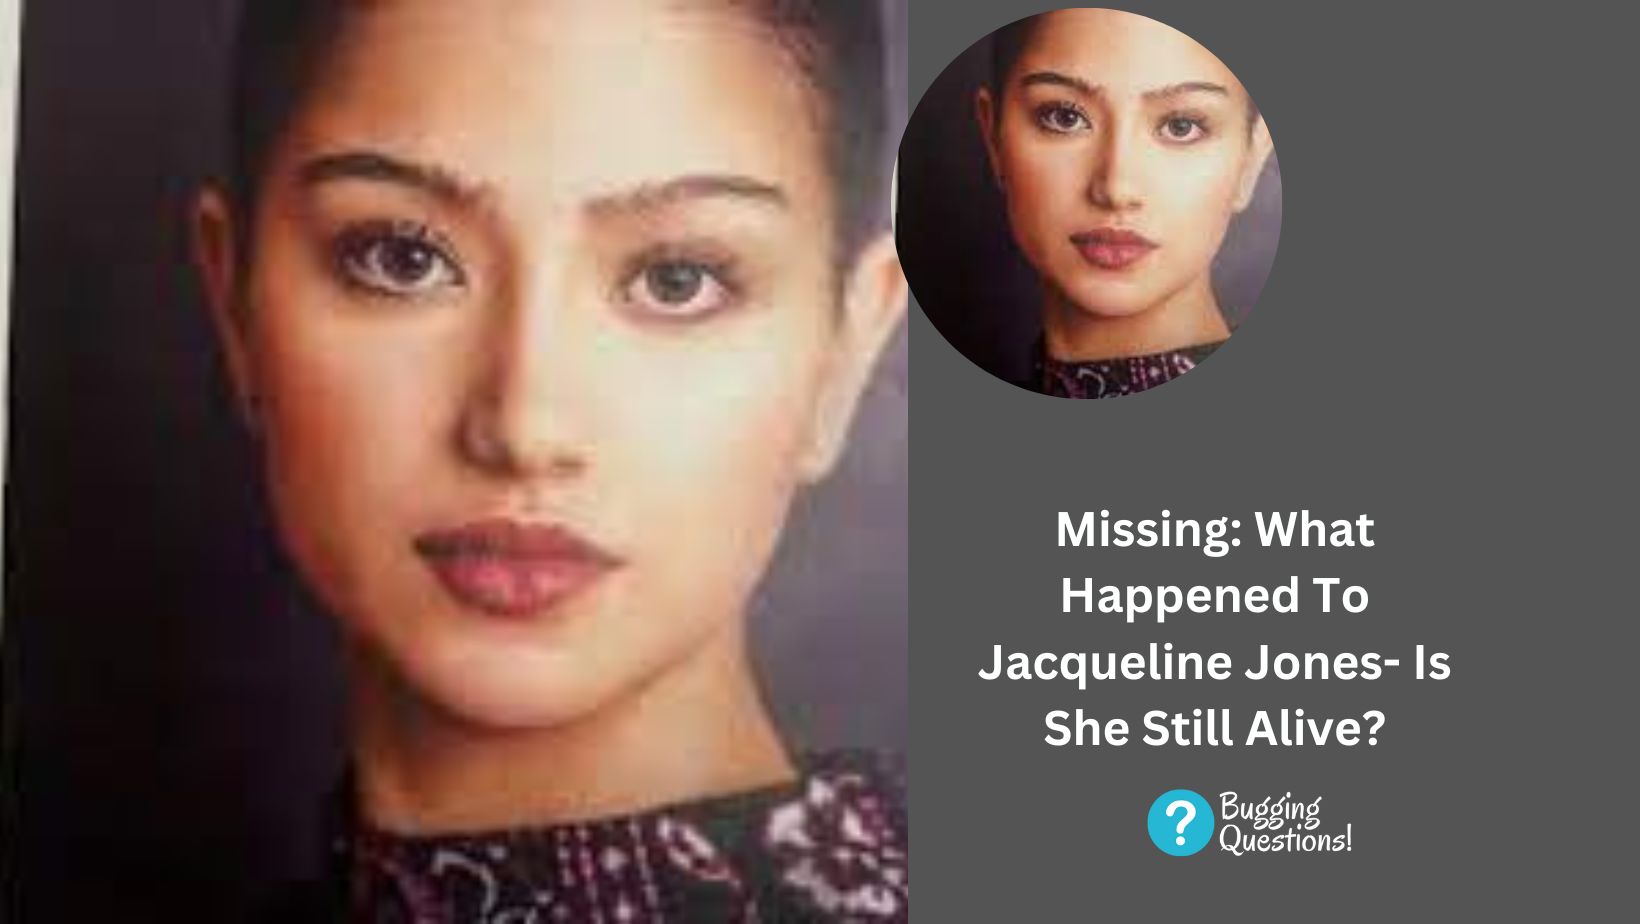 Missing: What Happened To Jacqueline Jones- Is She Still Alive?